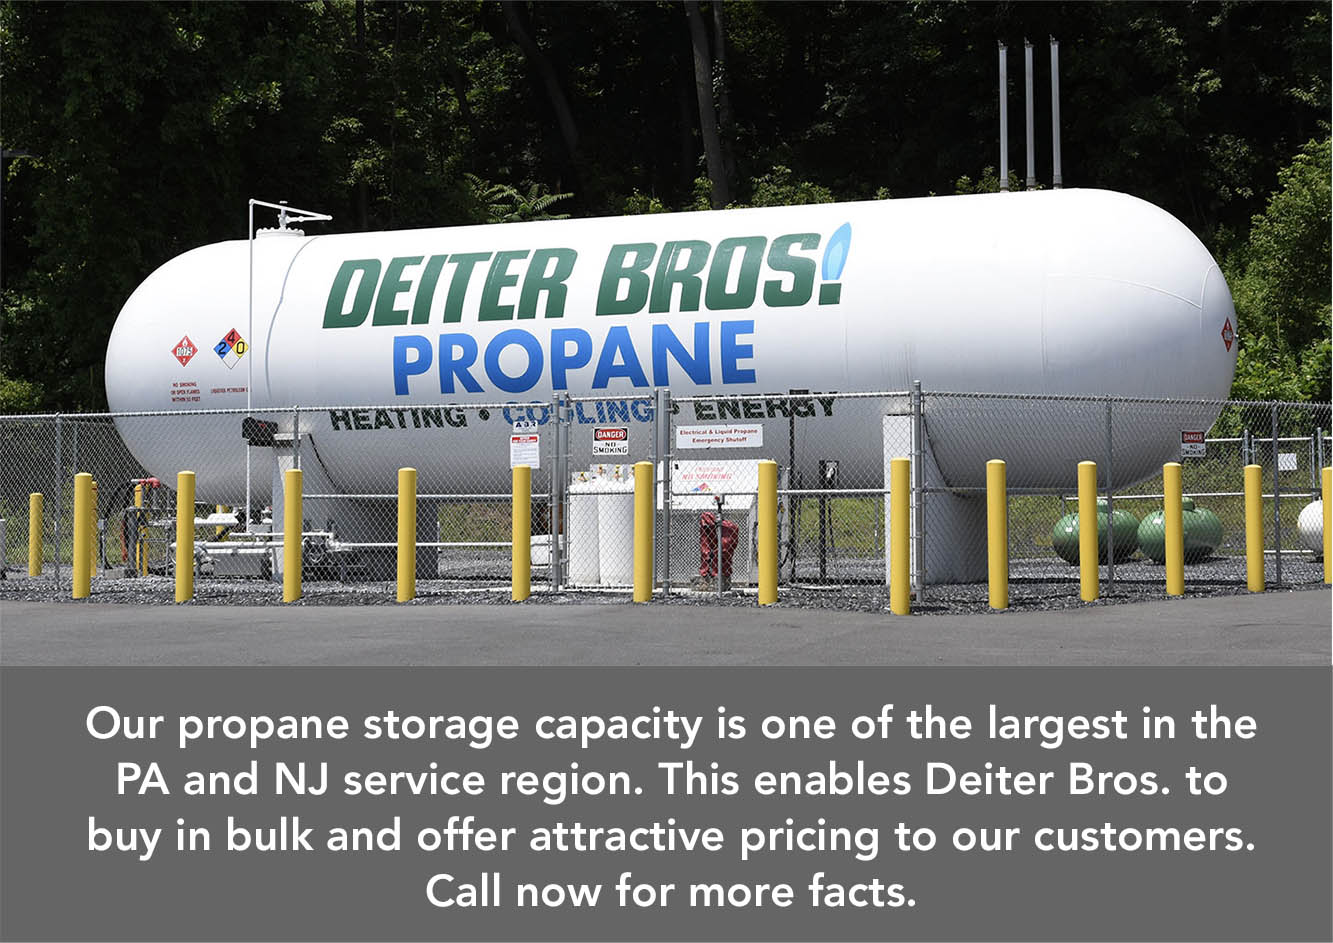 Our propane storage capacity is one of the largest in the PA and NJ service region. This enables Deiter Bros. to buy in bulk and offer attractive pricing to our customers. Call now for more facts.